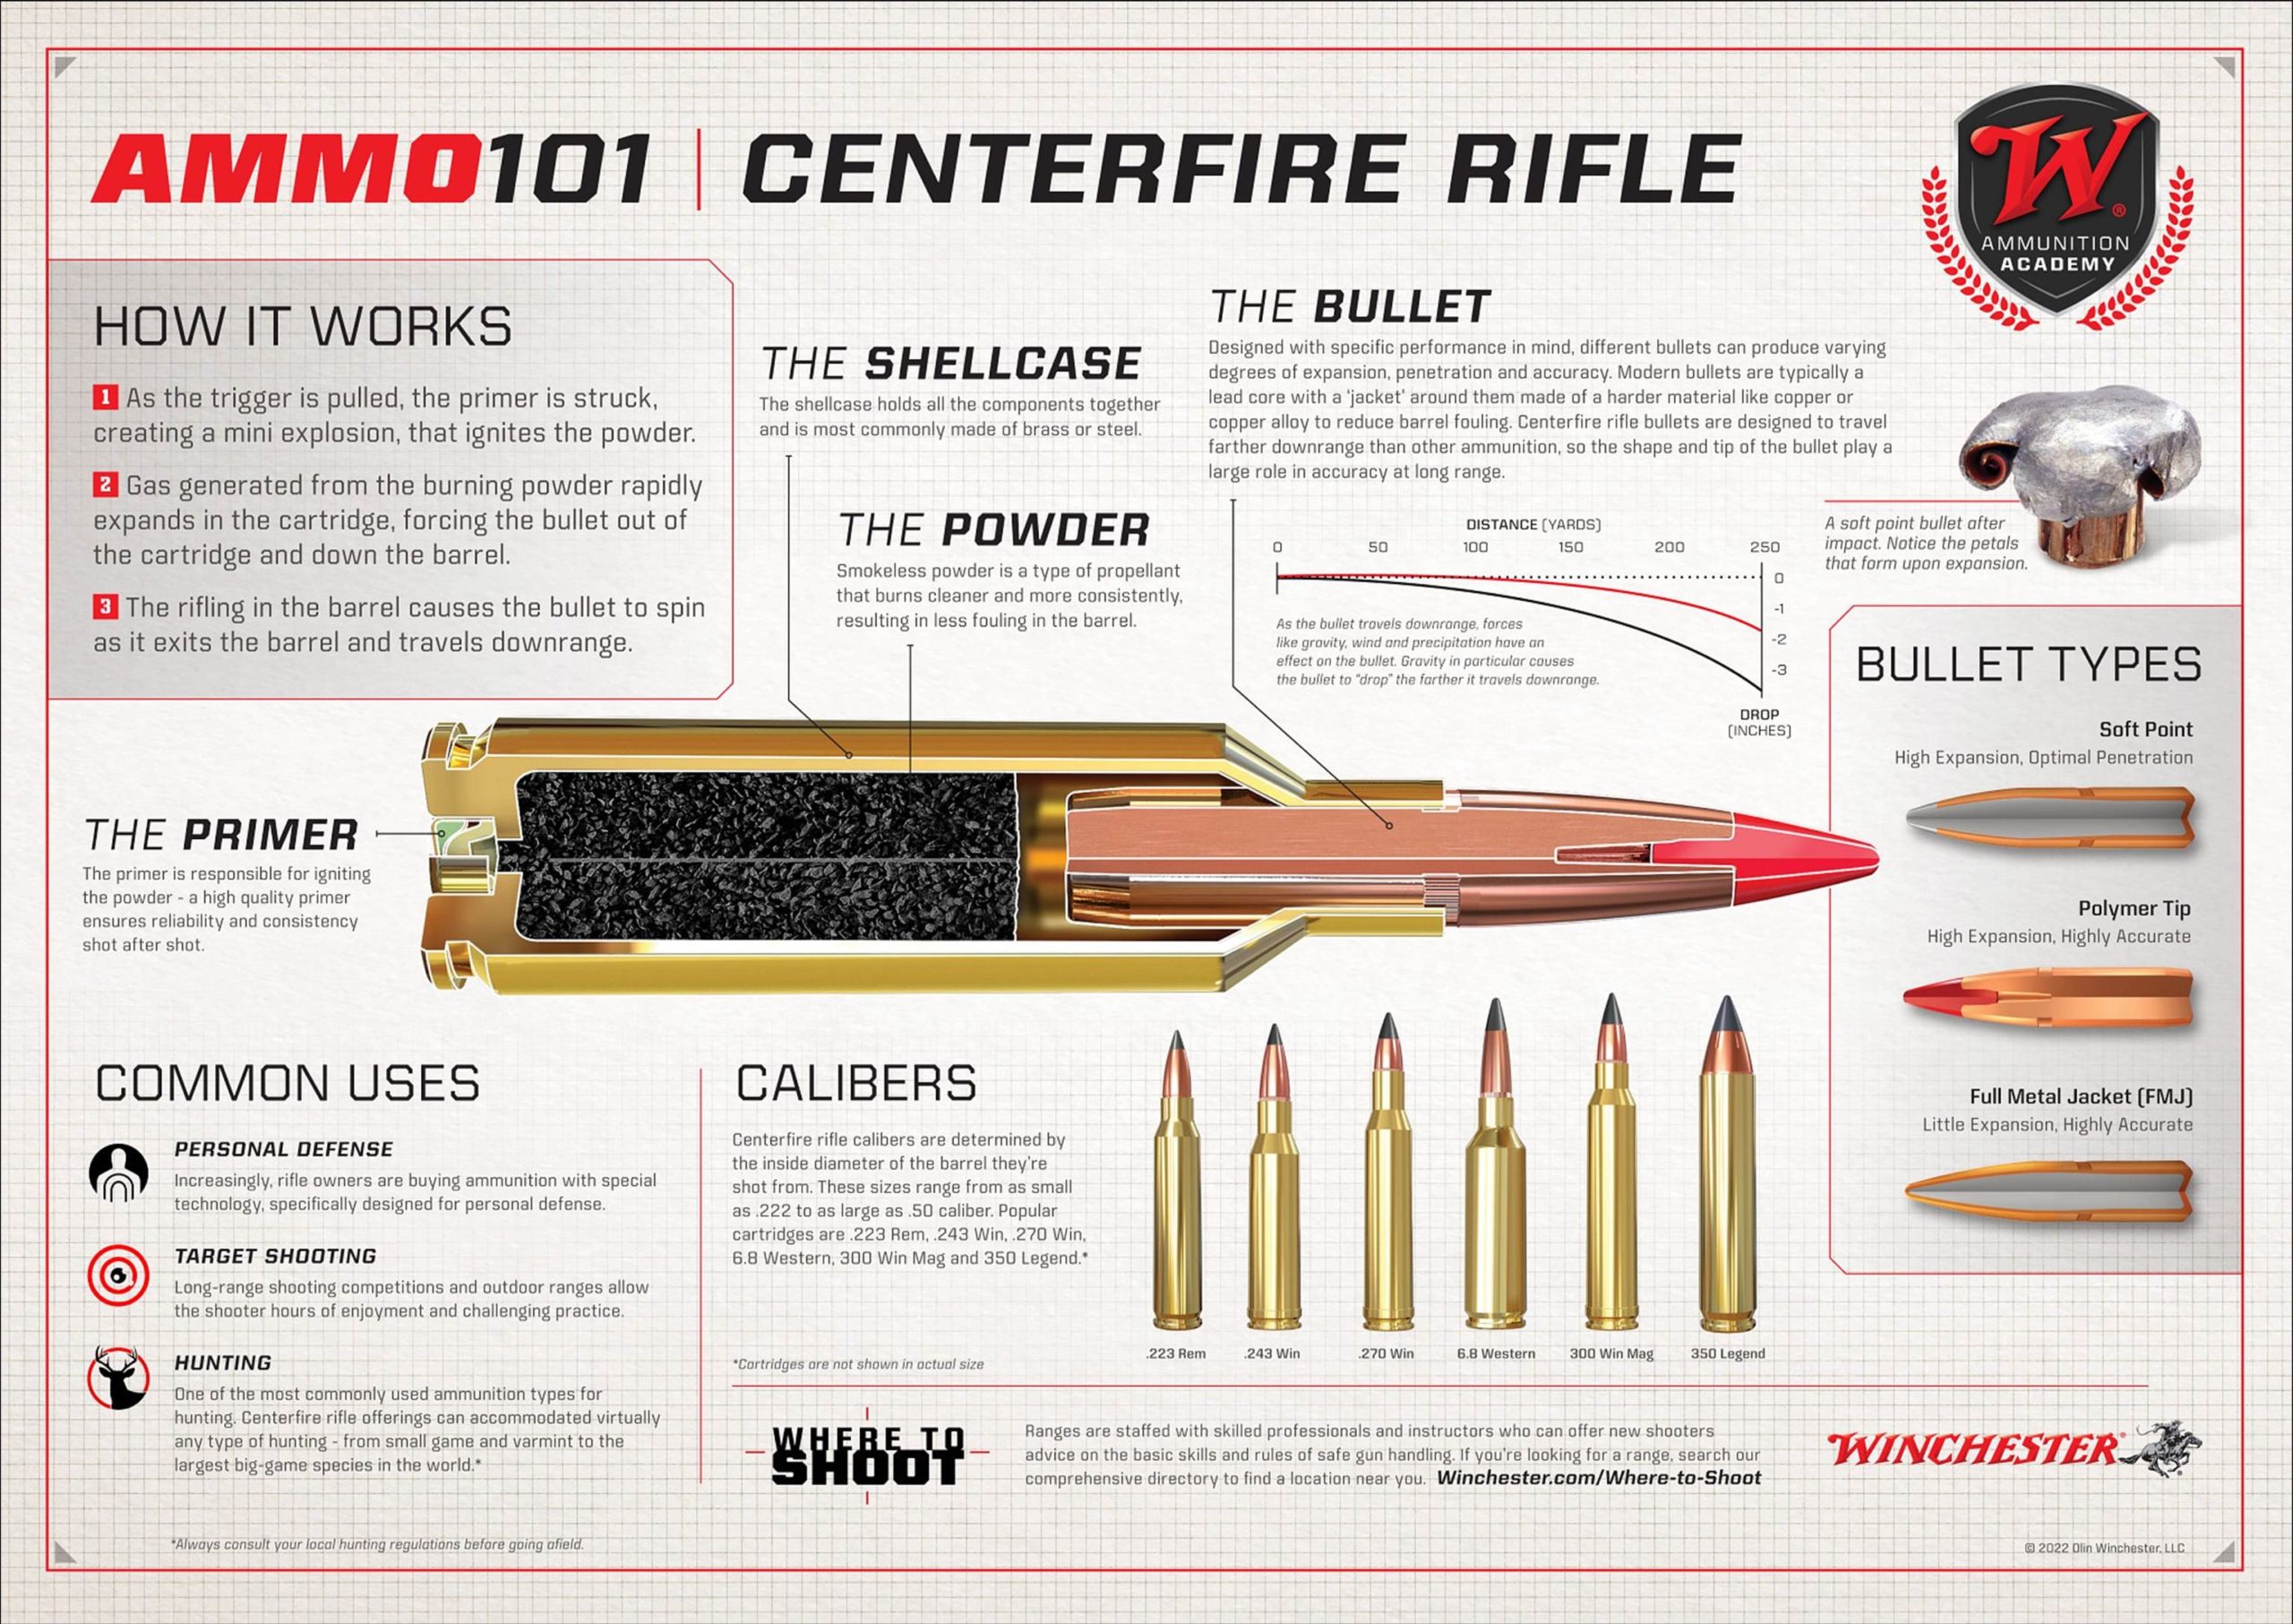 Image of the inner working of centerfire ammunition